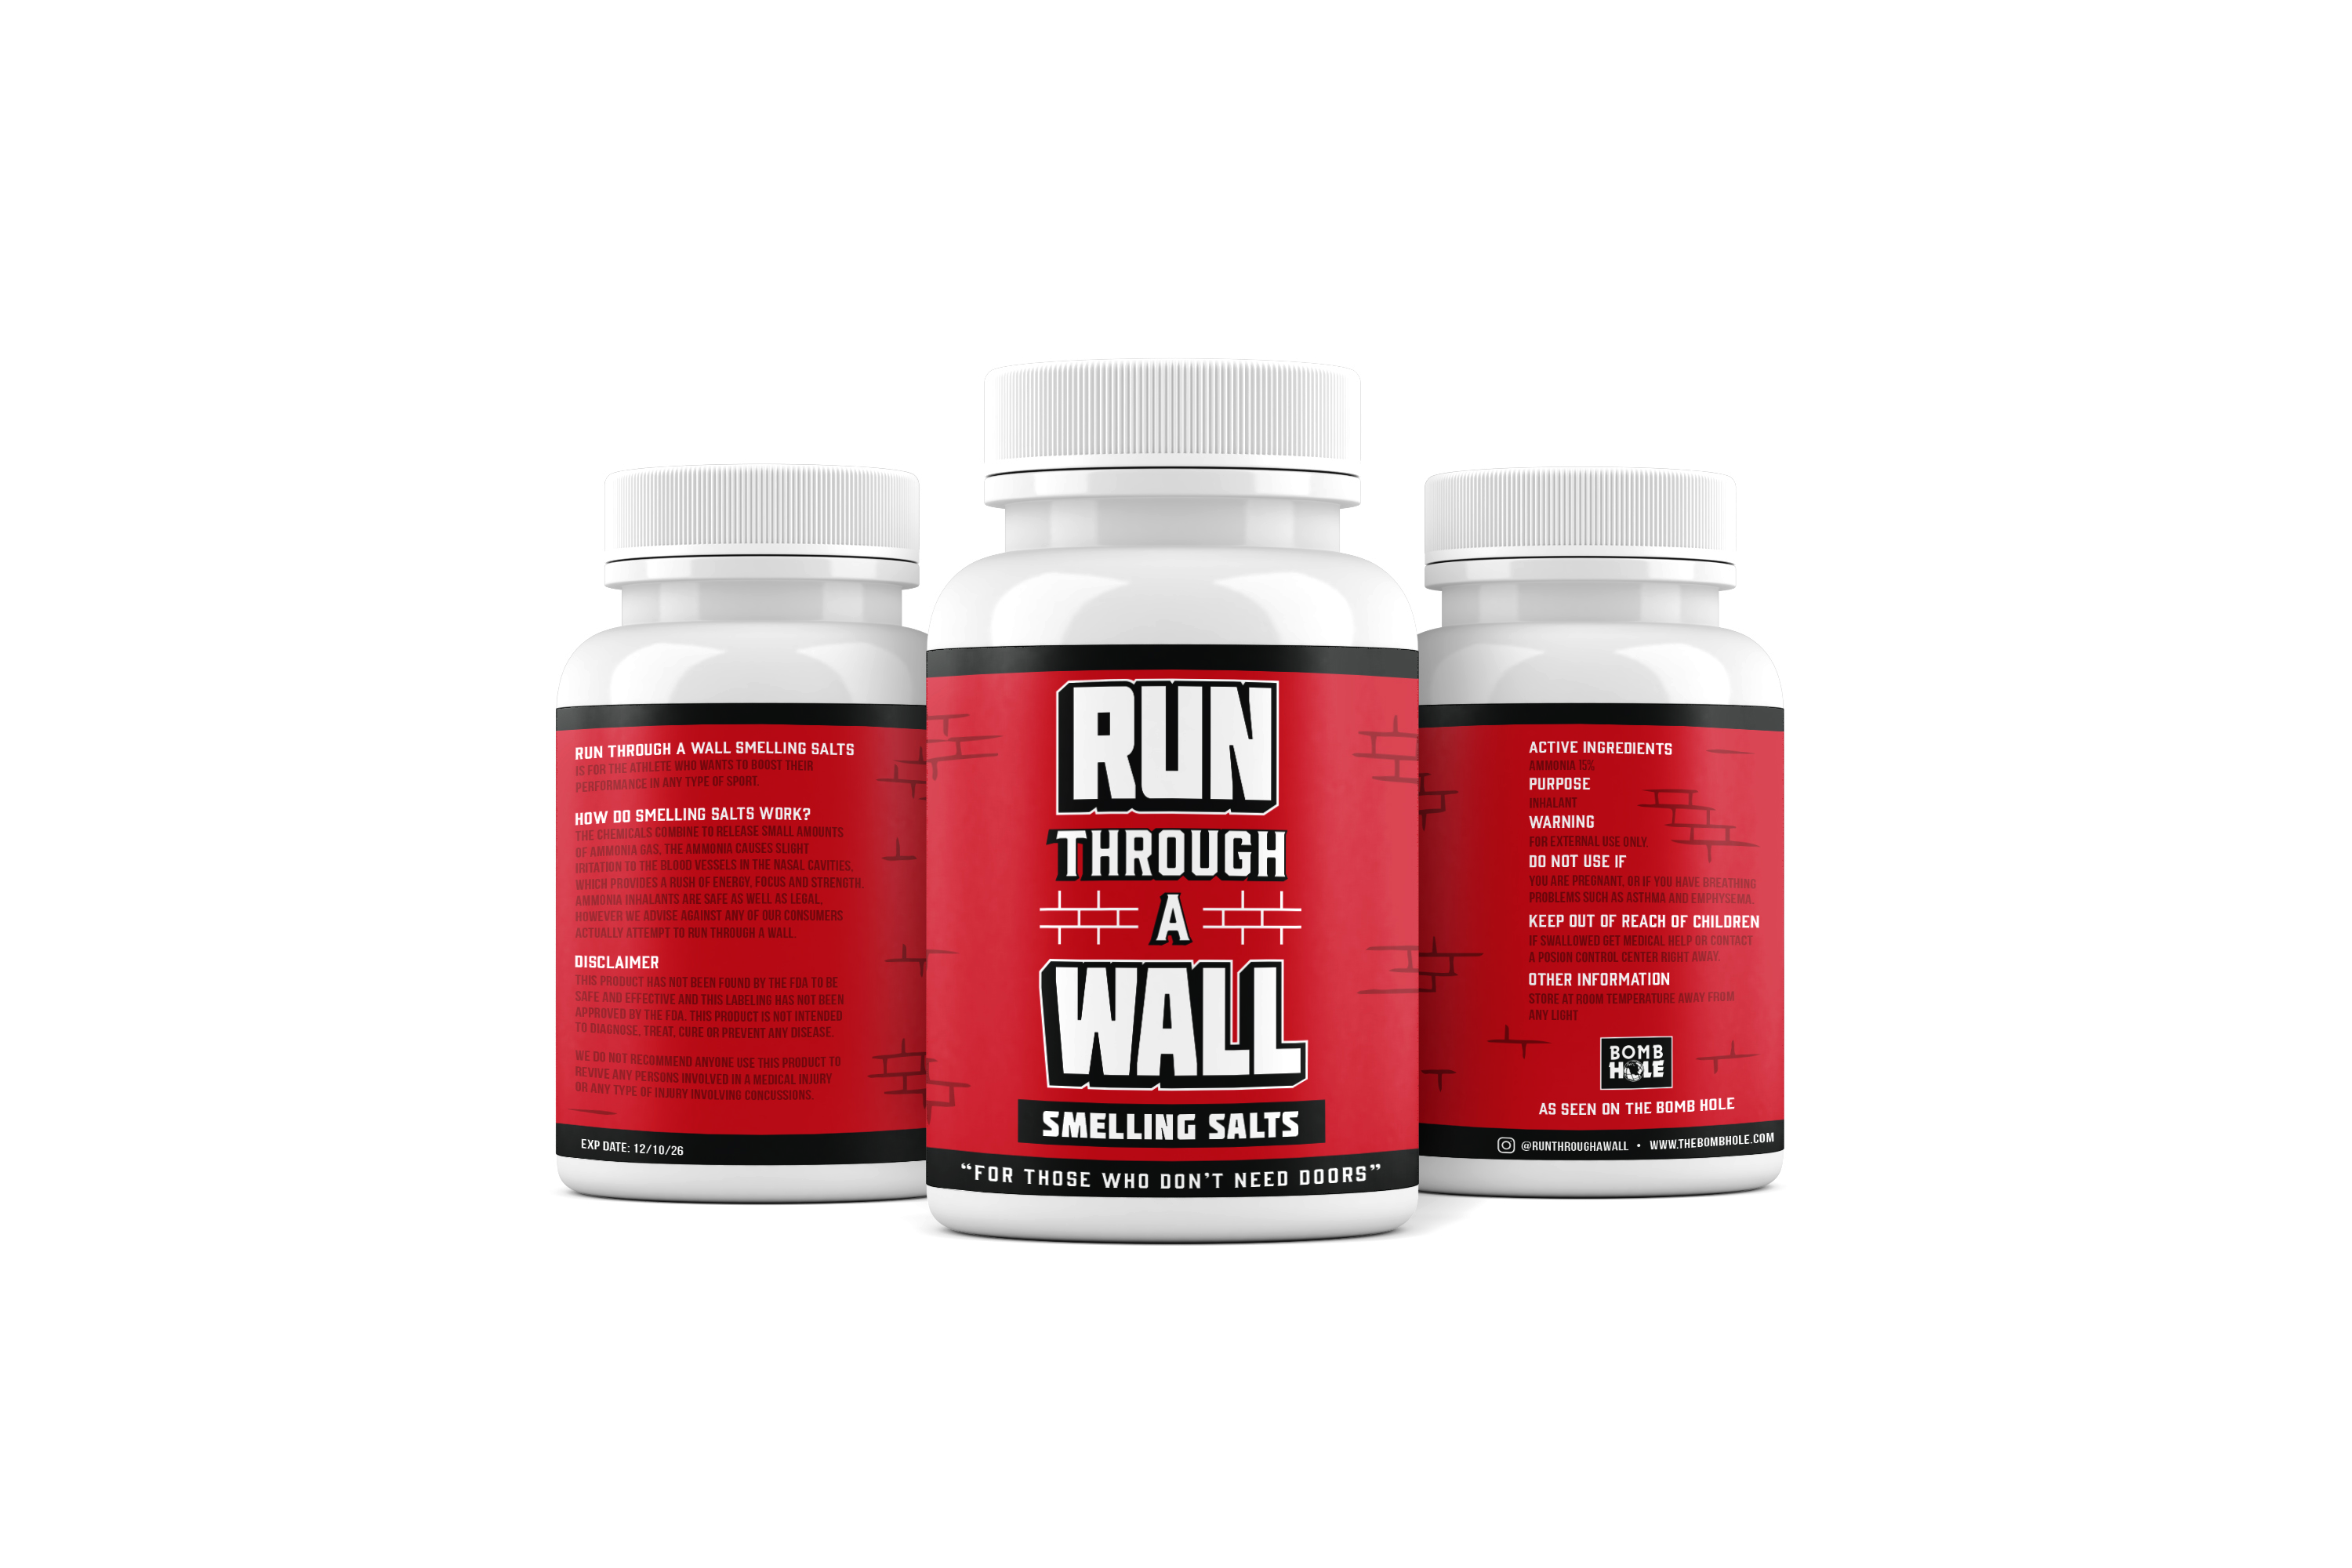 Run Through A Wall Smelling Salts – The Bomb Hole